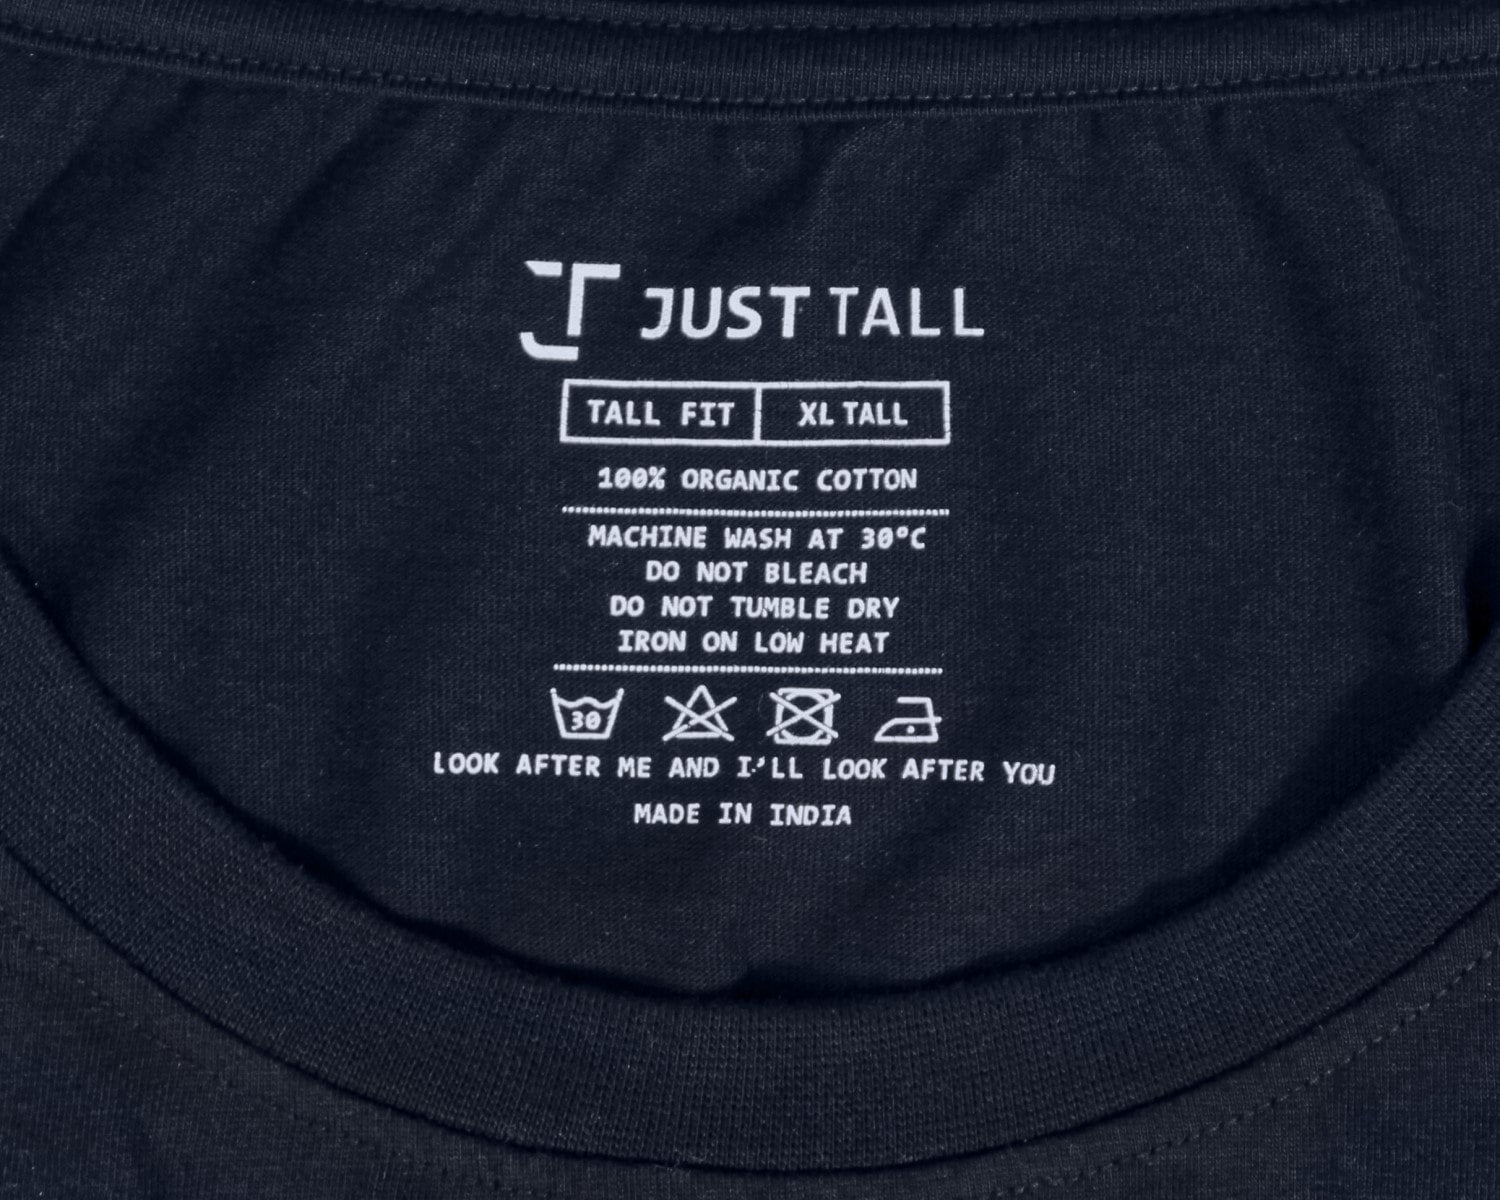 A close up of a printed Just Tall neck label detailing the size and care instructions.